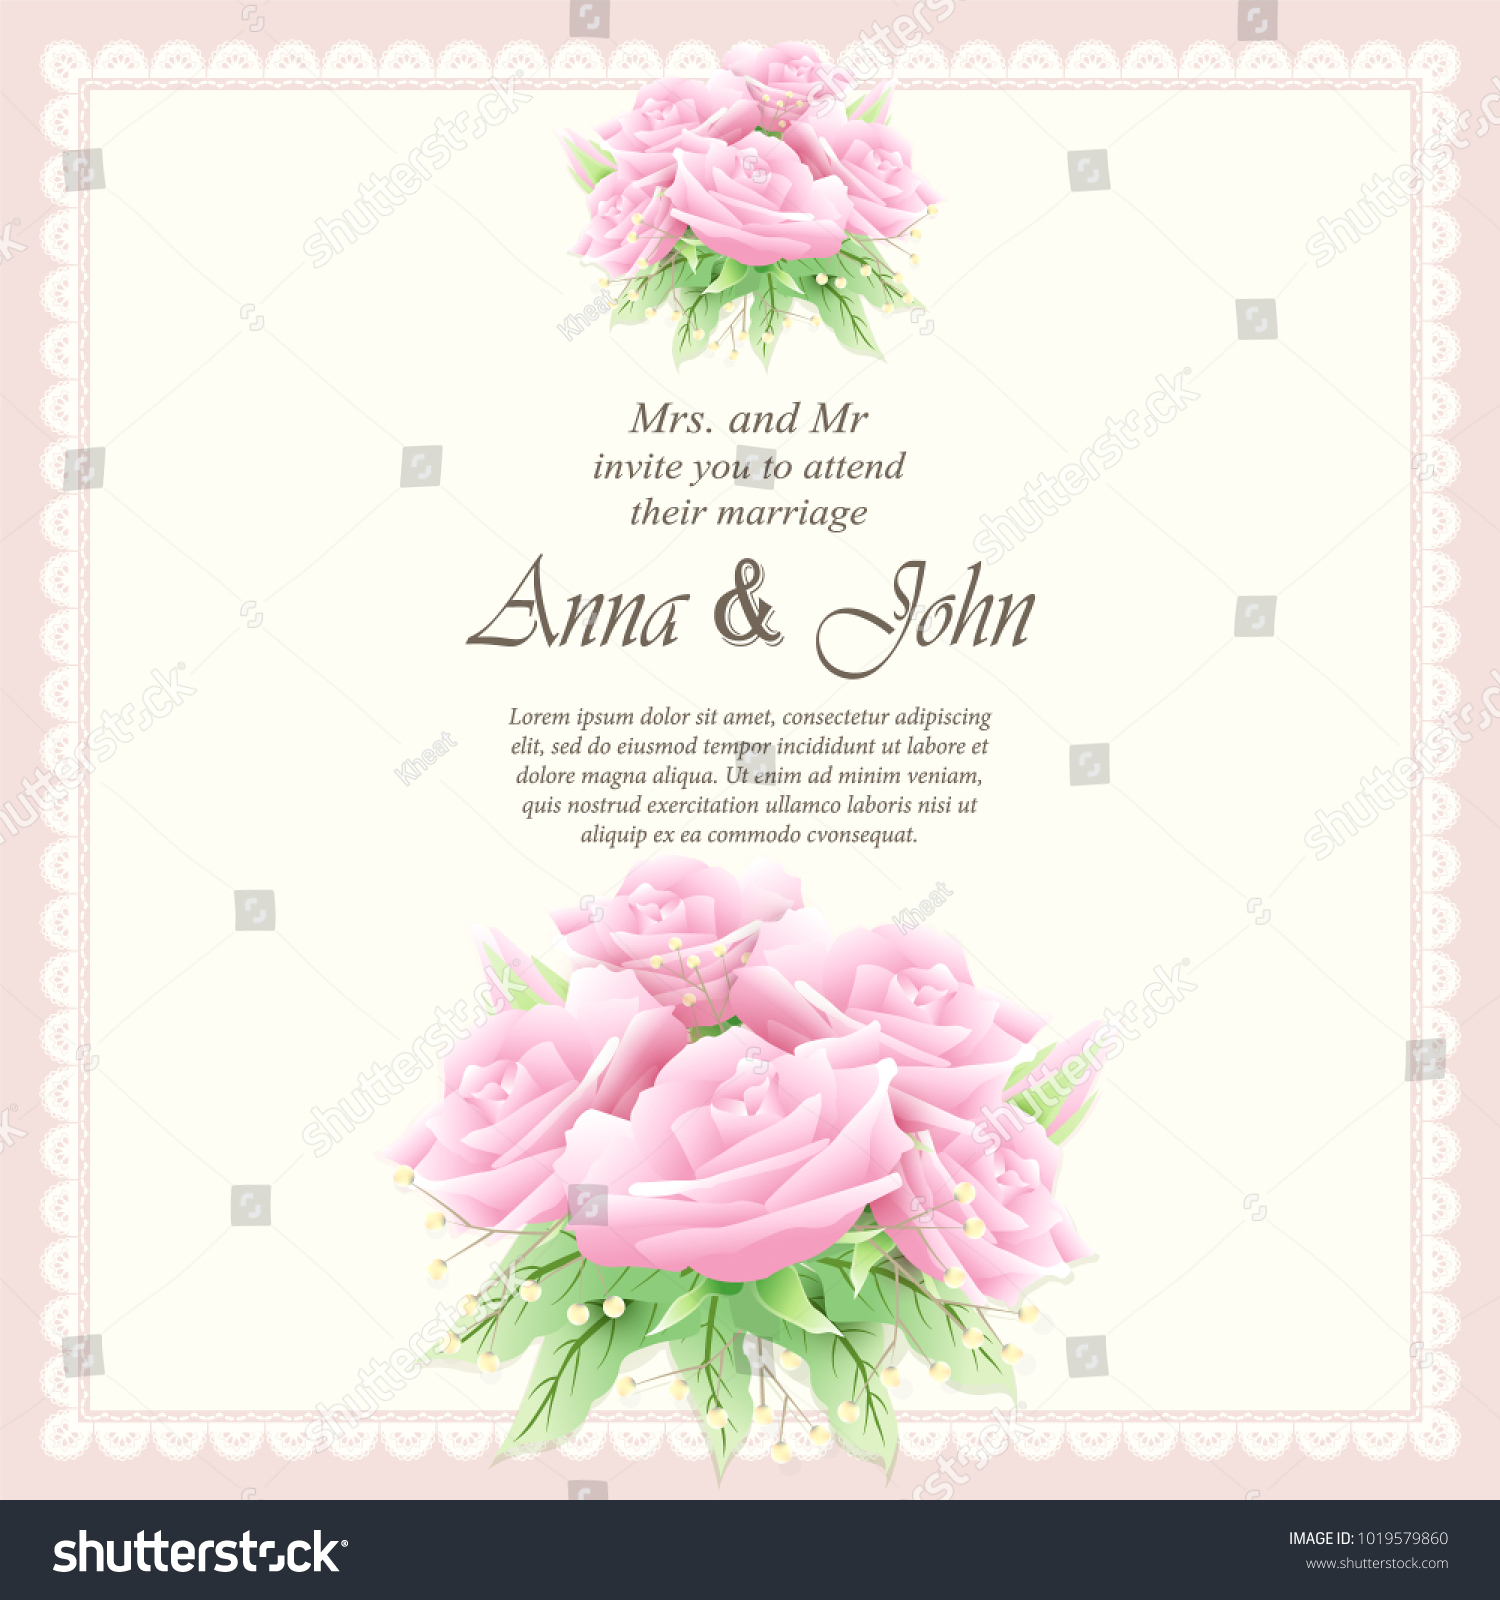 Invitation card, Wedding card with pink rose background #1019579860